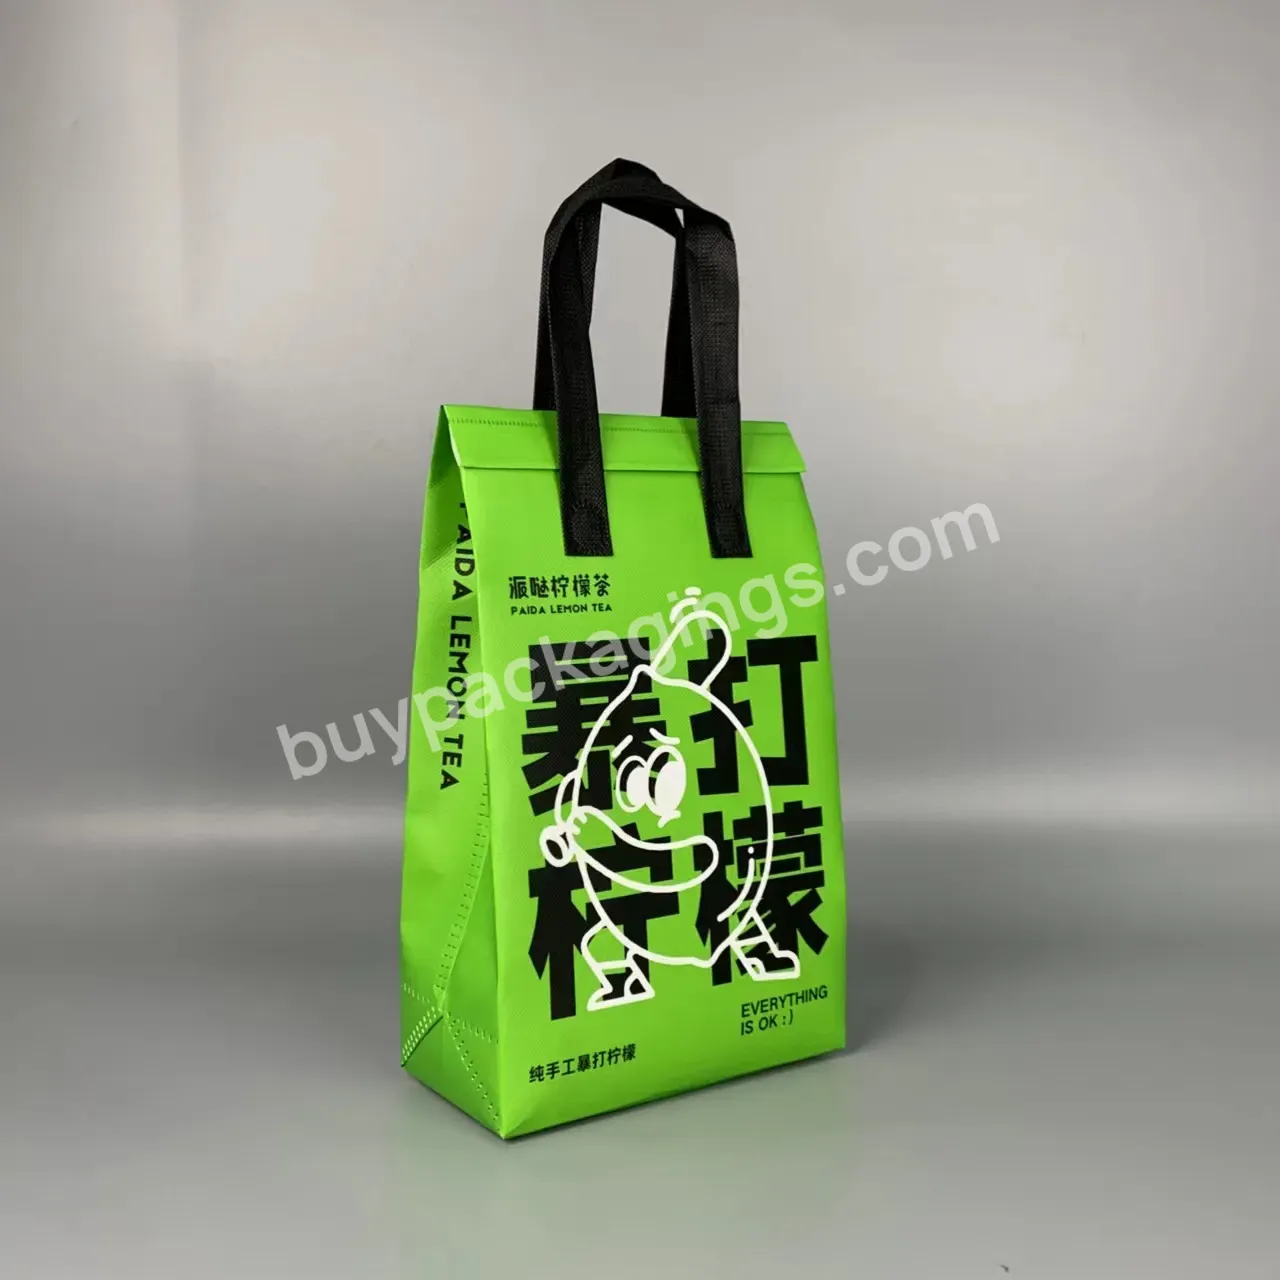 Fashion Style Tough Durable Reusable Recyclable Customized Non Woven Cooler Bag With Printing For Food Packing - Buy Fashion Style Tough Non Woven Bag,Durable Reusable Cooler Bag,Laminated Customized Bag With Logo.